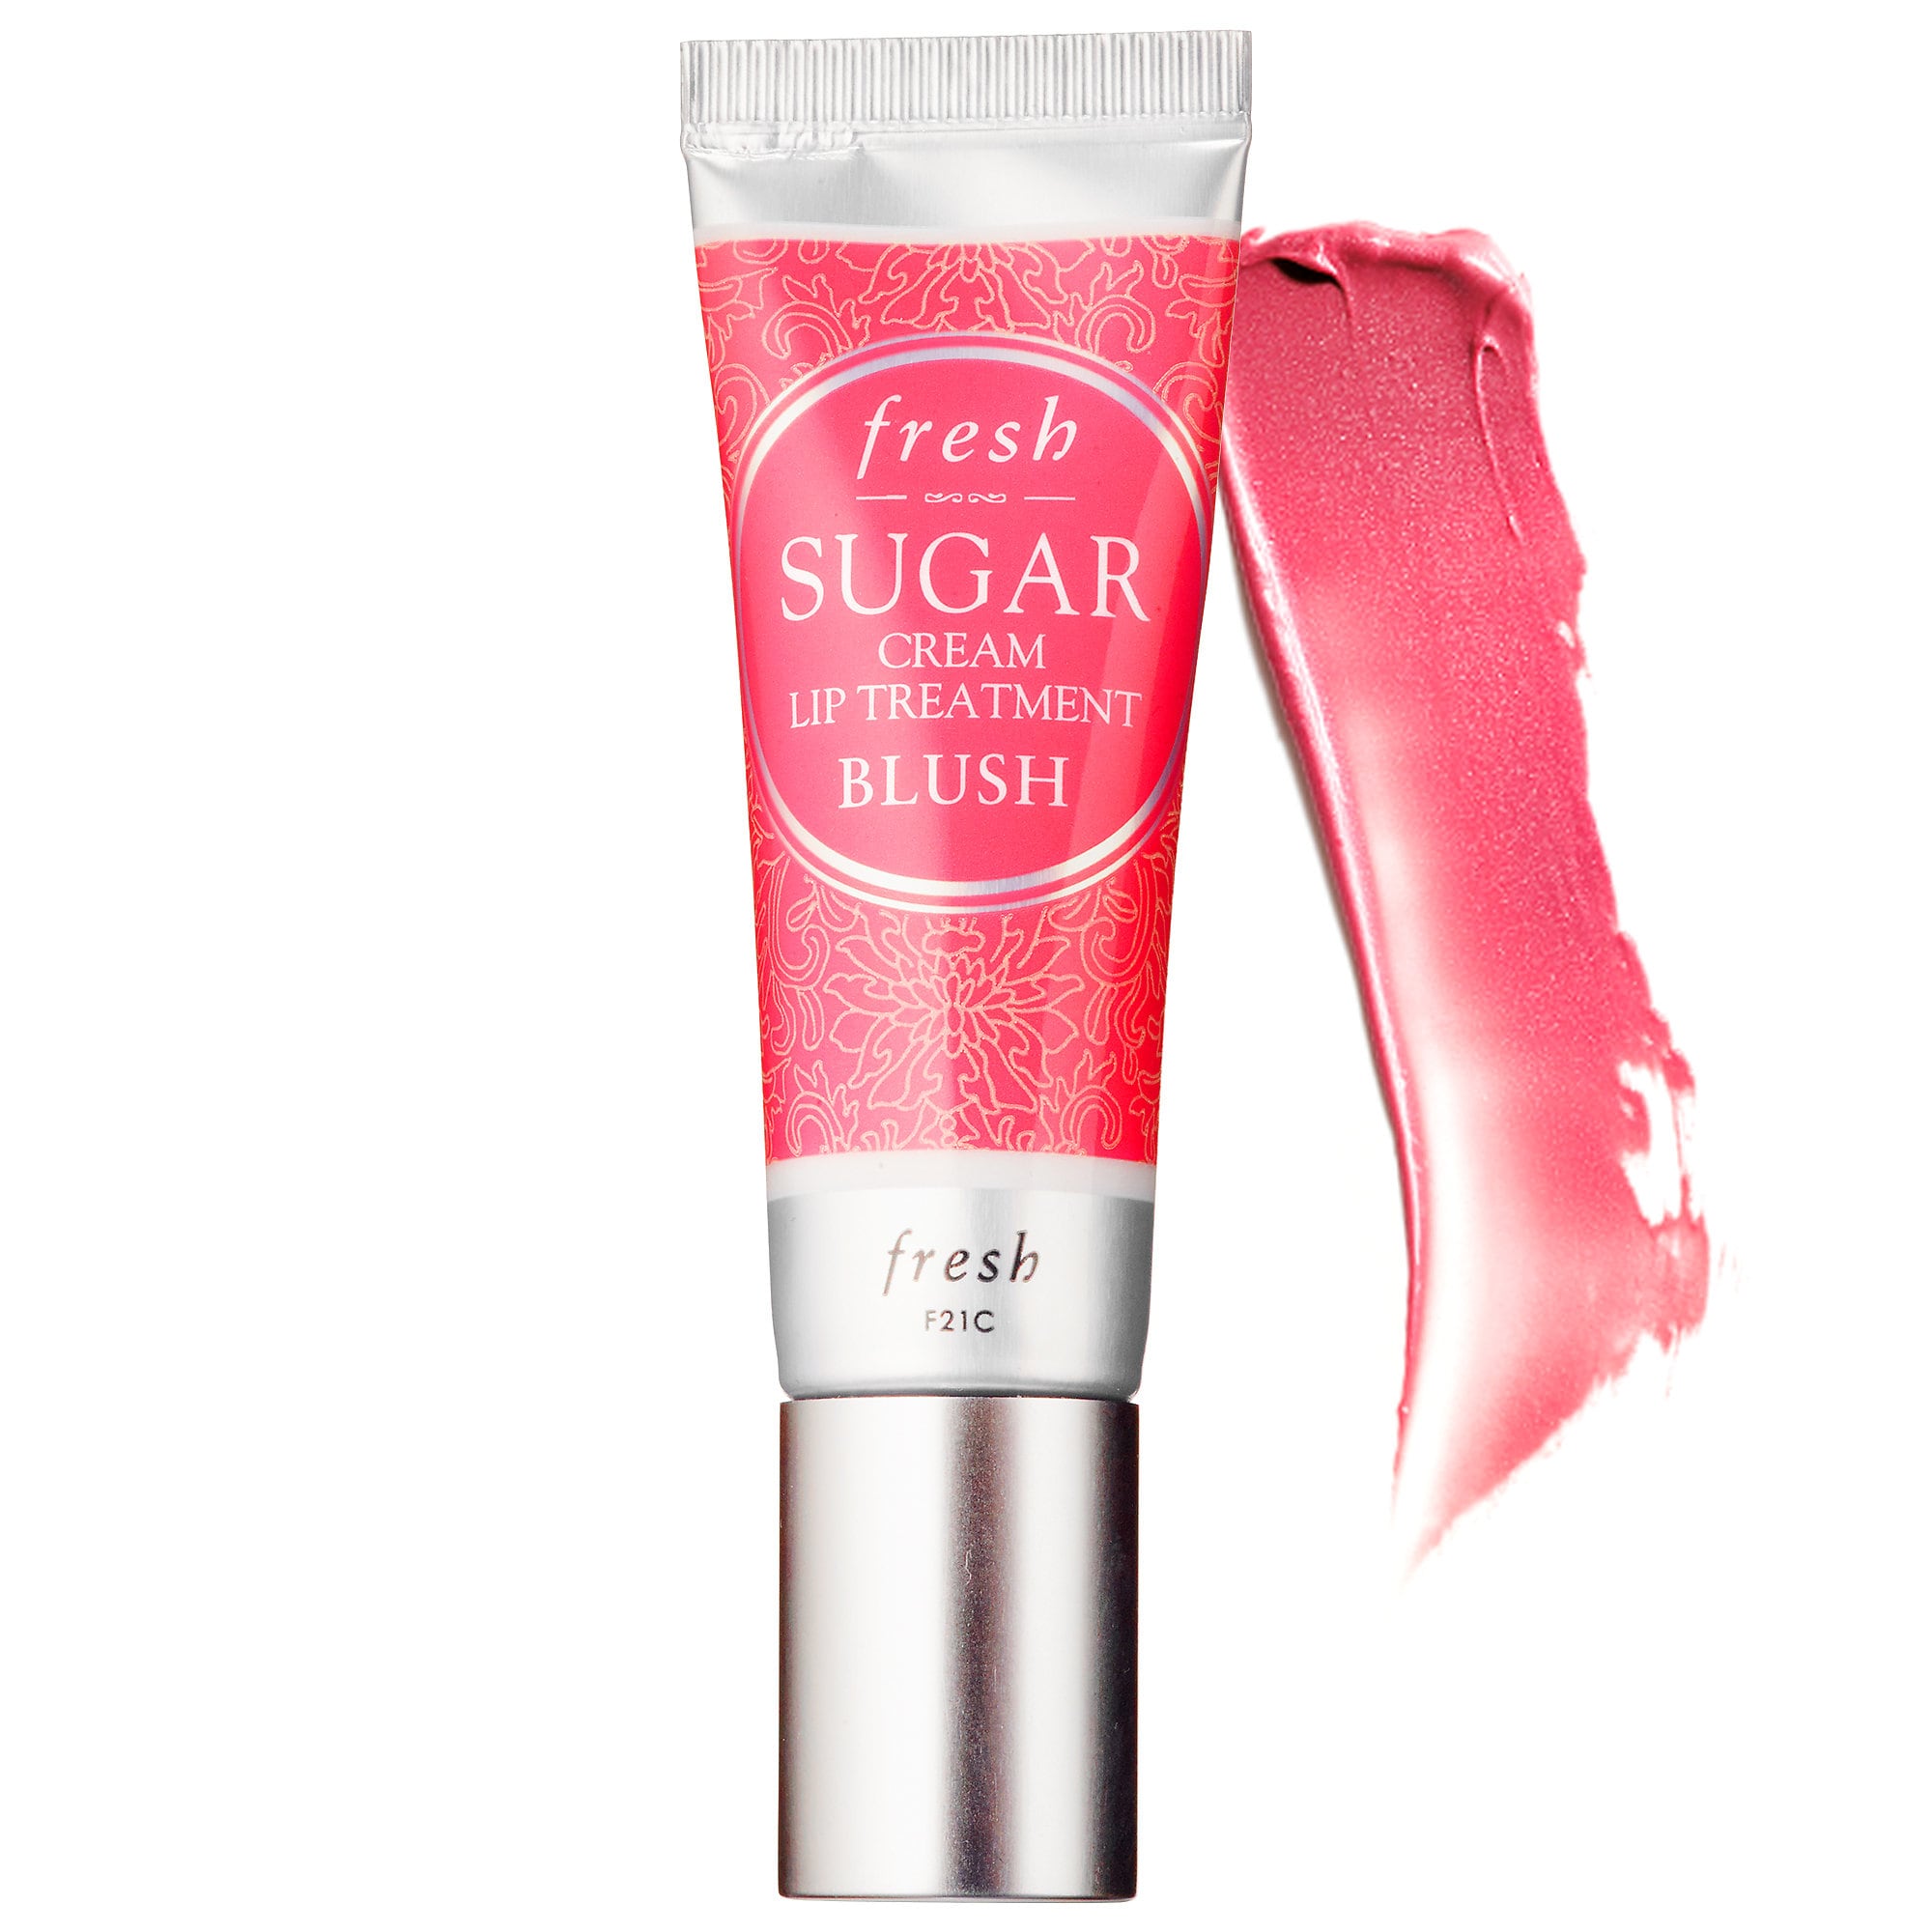 FRESH Sugar Cream Lip Treatment - Top 15 products from Sephora India for Dry Chapped Lips- Reviews & Price